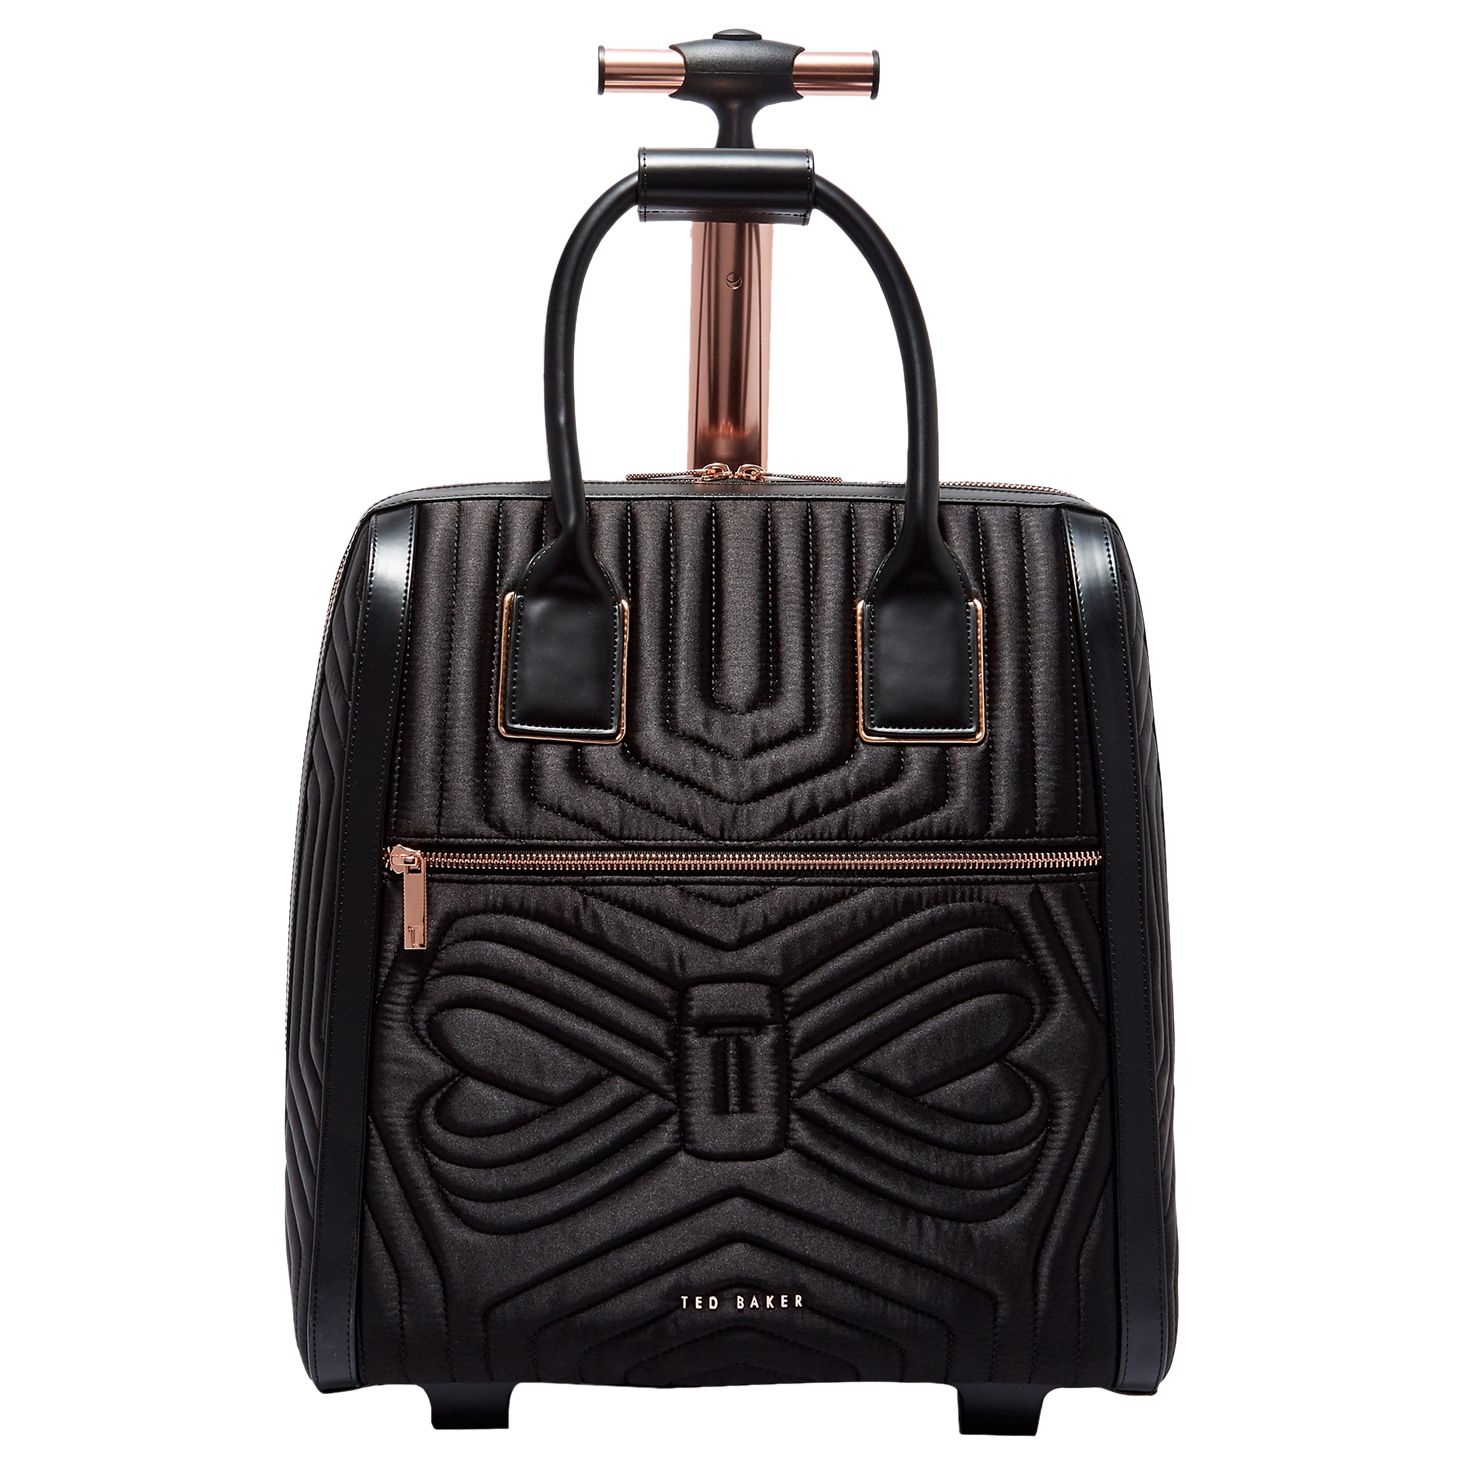 Ted Baker Anisee Quilted Bow Travel Bag at John Lewis & Partners